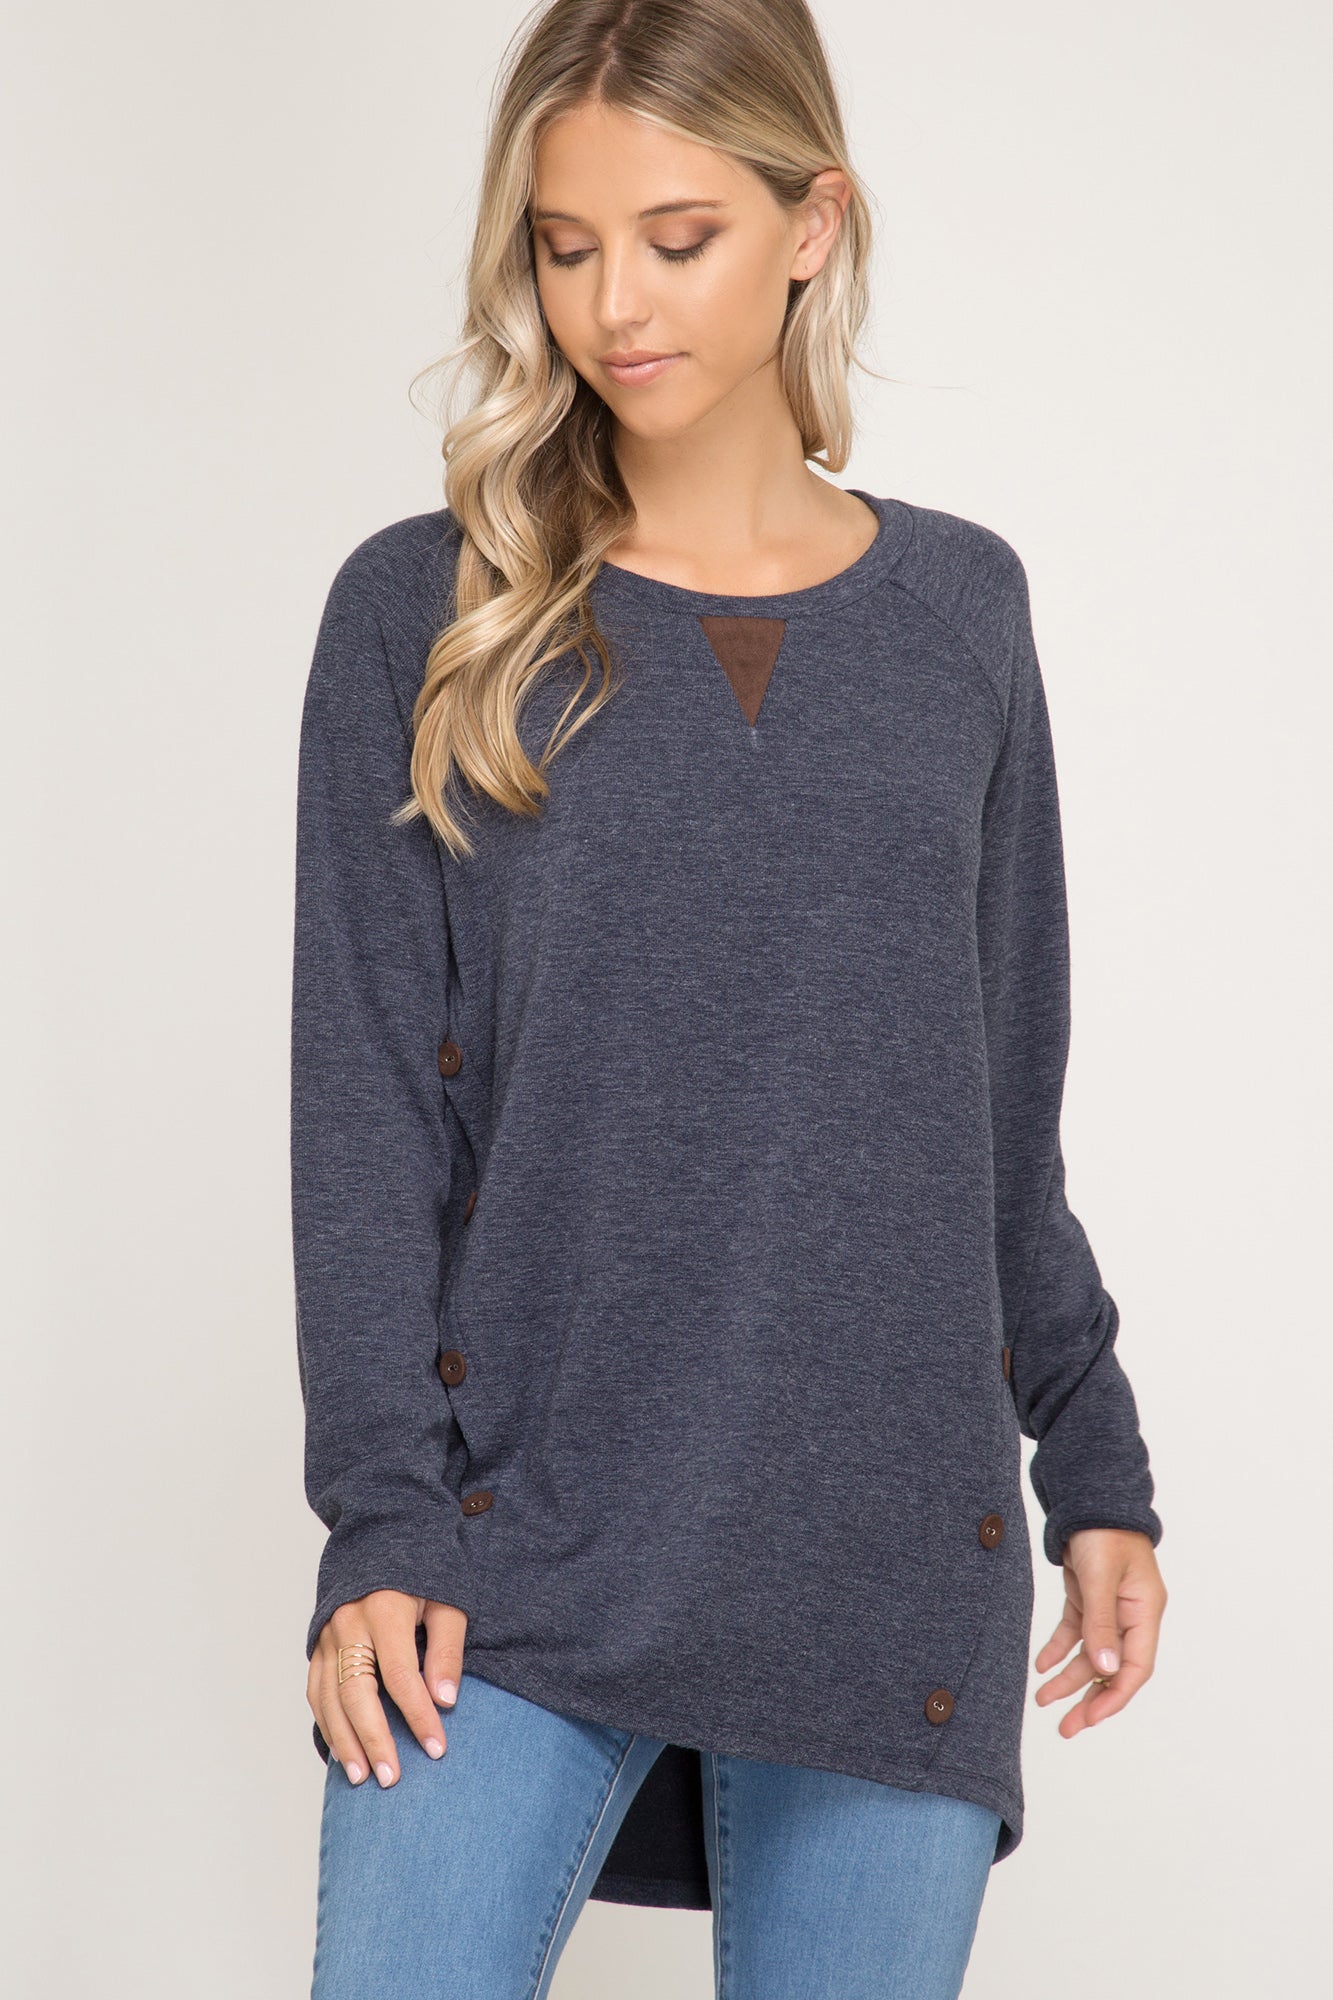 Long Sleeve Terry Knit With Faux Suede Button Details!